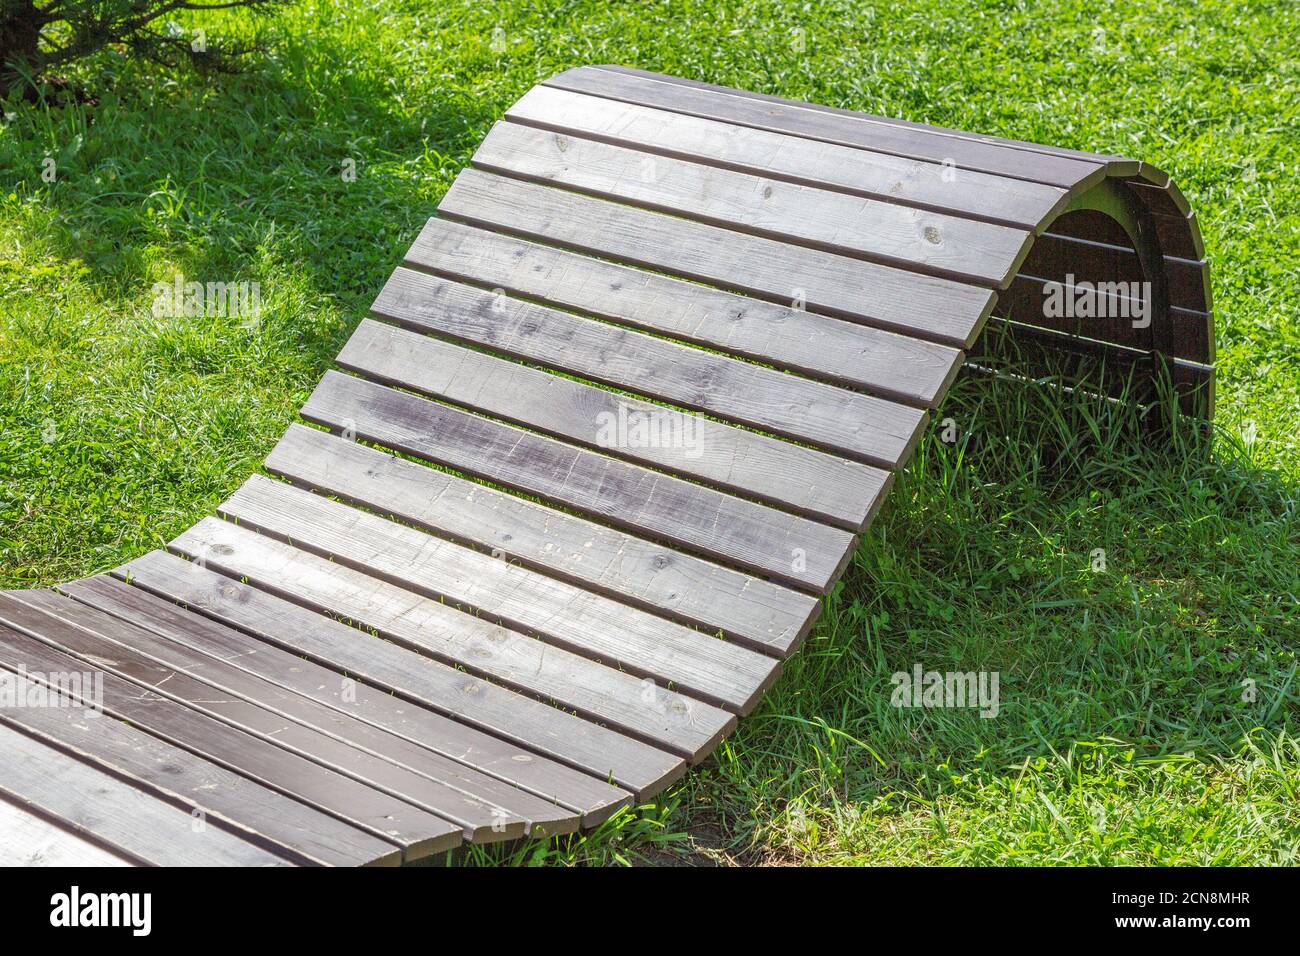 Homemade wooden furniture for the garden and backyard Stock Photo